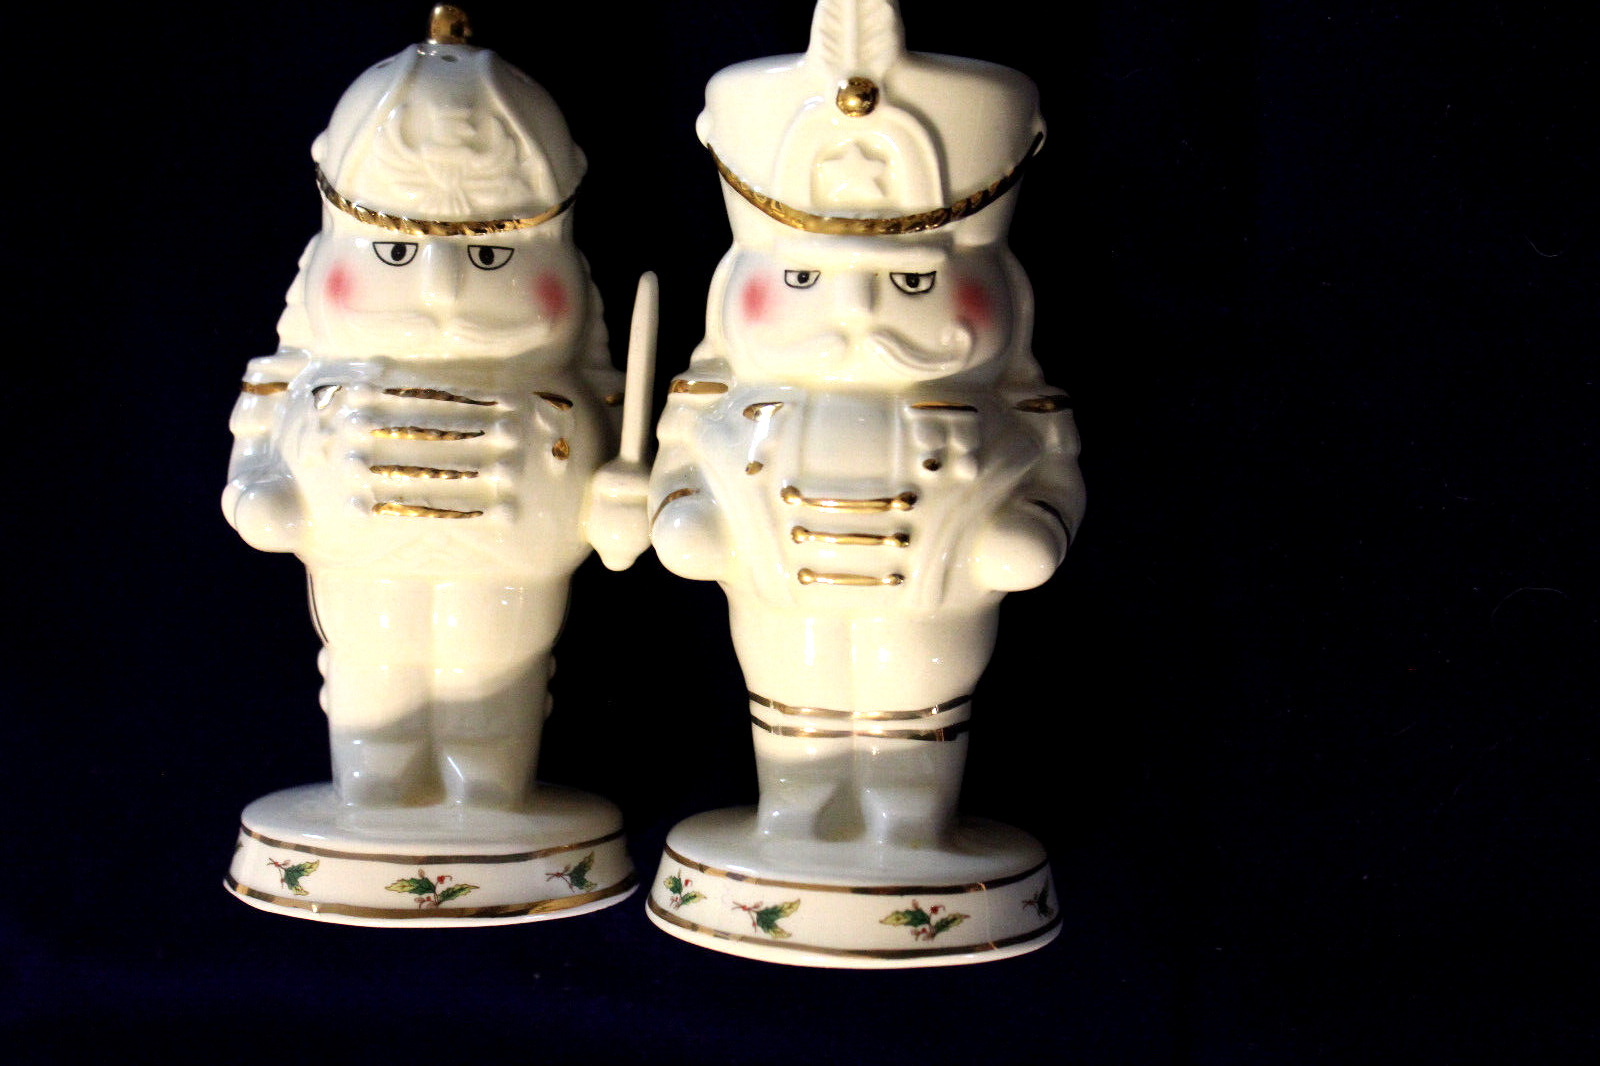 HOLLY HOLLIDAY CREAMIC SALT & PEPPER SHAKERS WHITE WITH GOLD TRIM